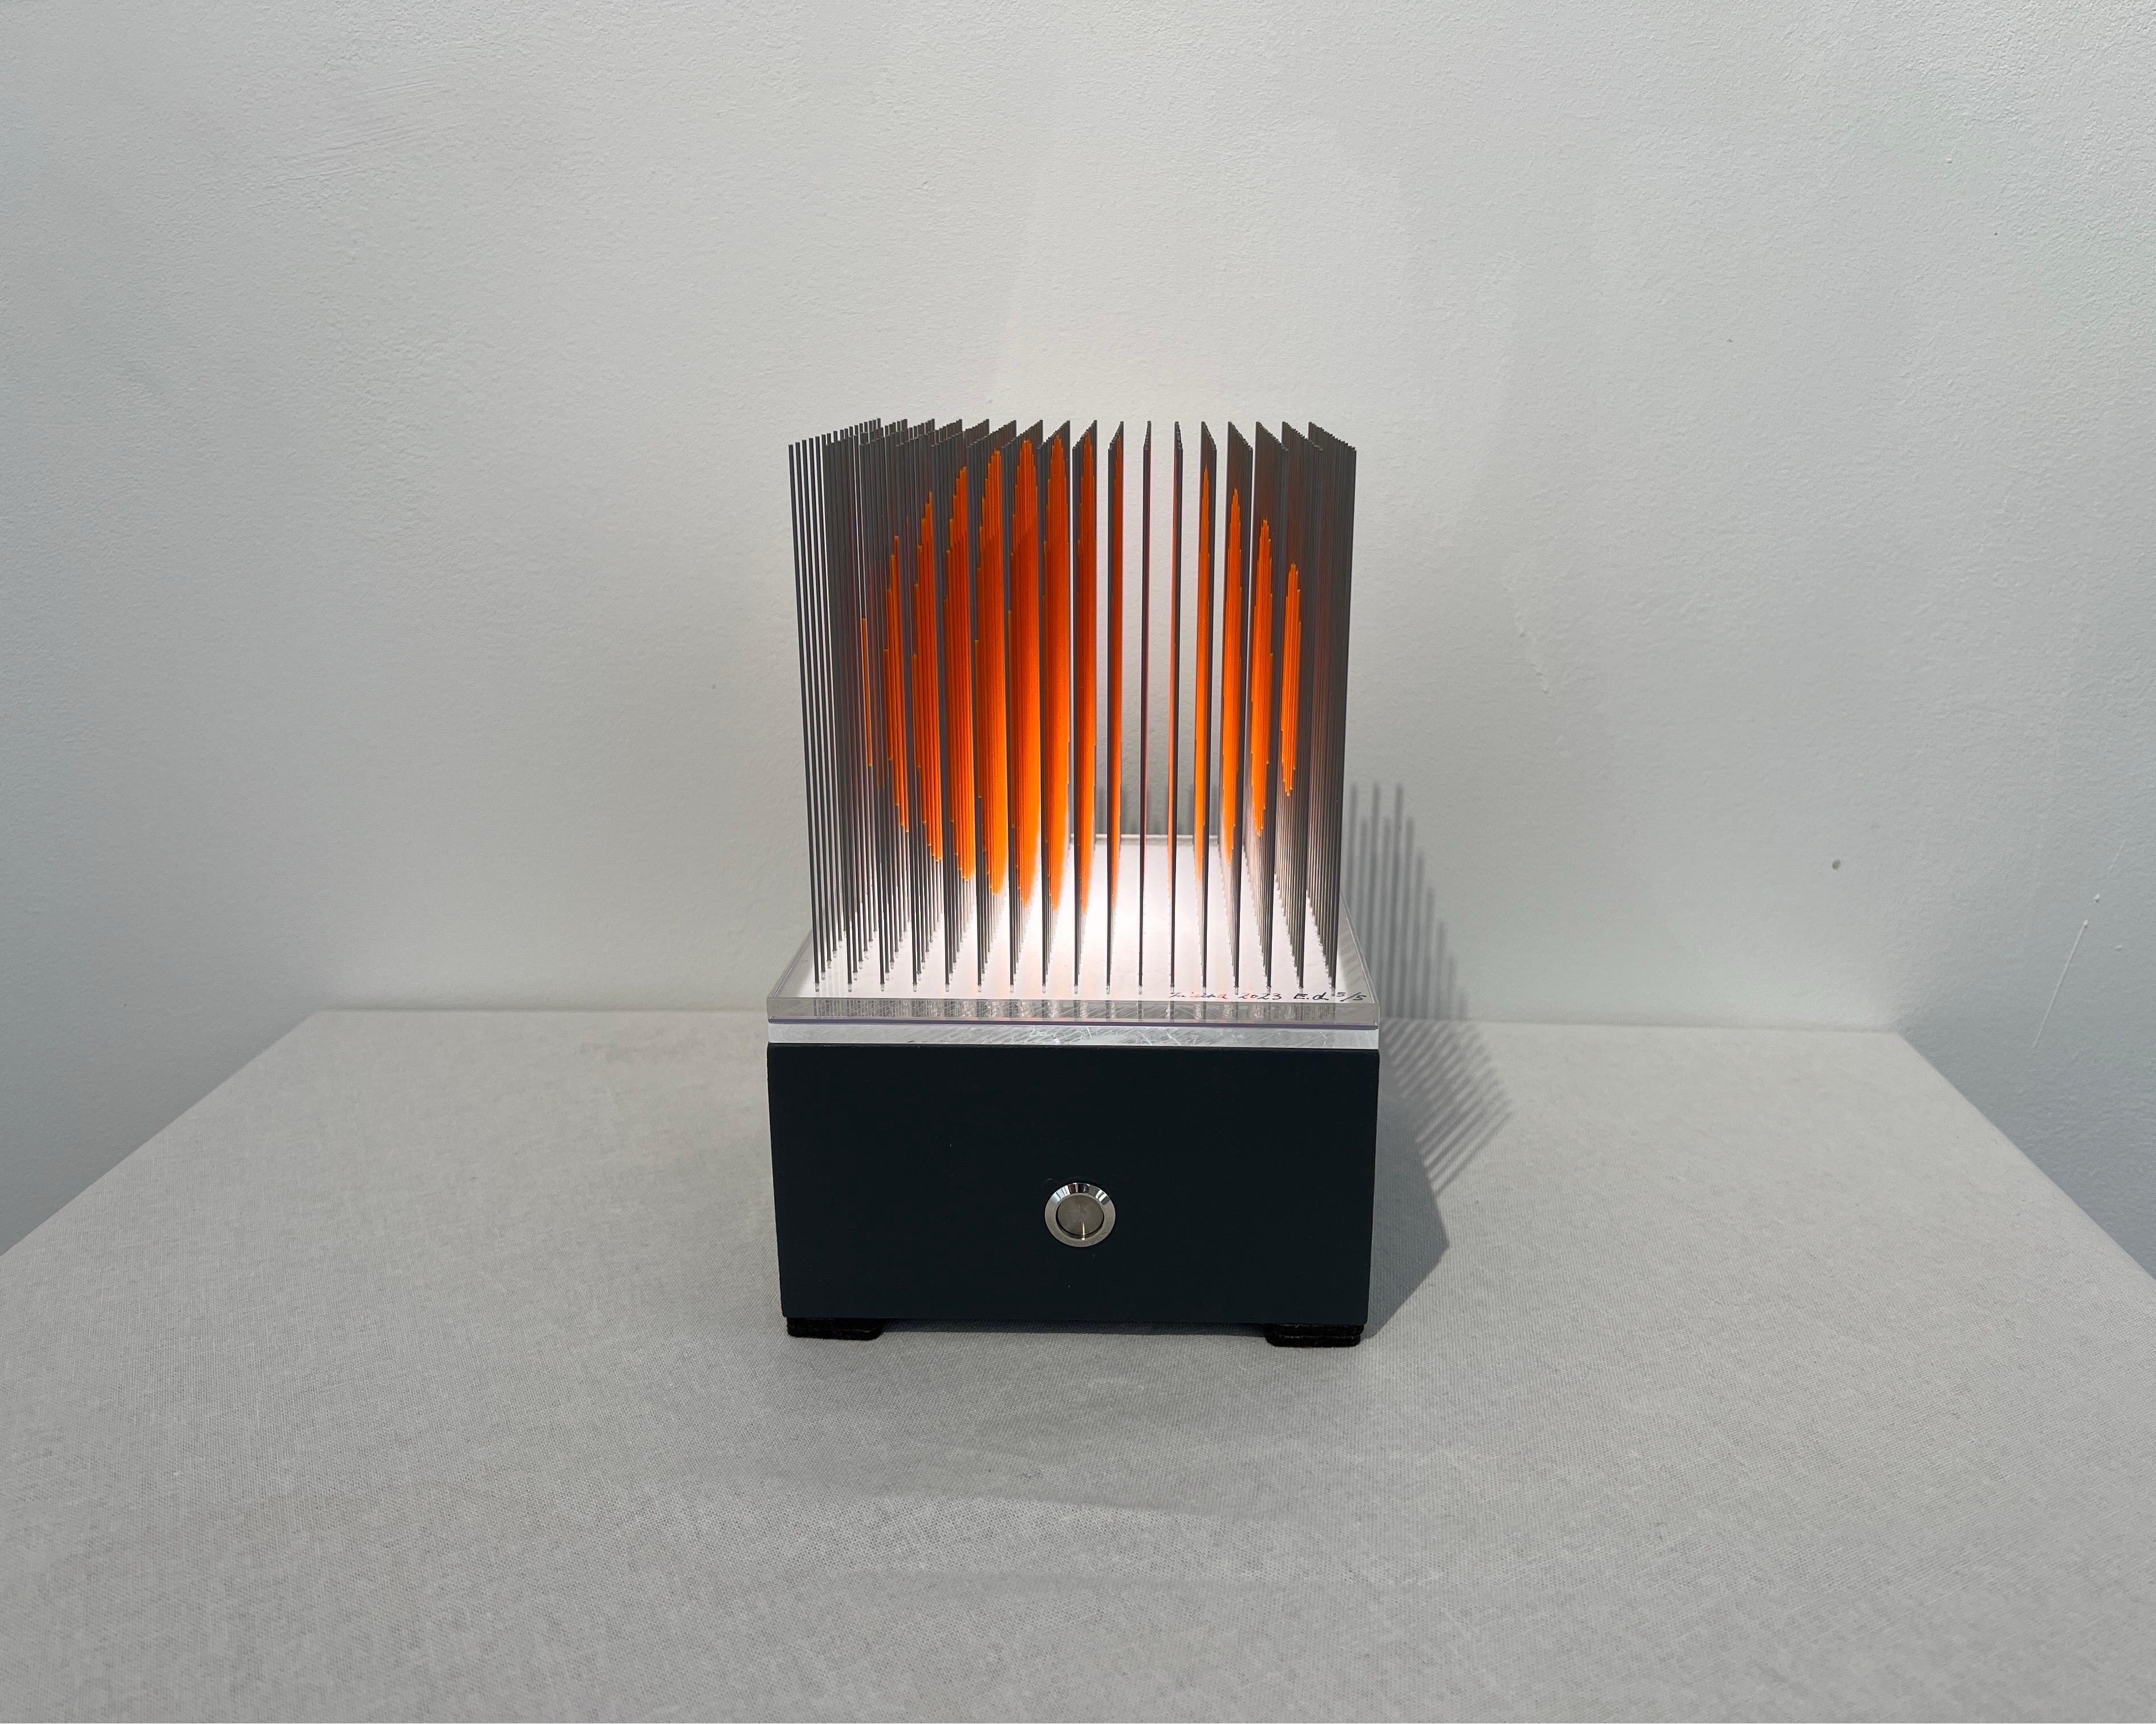 Acrylic on stainless steel needles, entirely hand done, on led pedestal (not included).
Yoshiyuki Miura is a kinetic art (op art) Master, highly collectable. This piece is light by a LED pedestal. The overall dimensions are 22,5 cm high, by 15 x 15